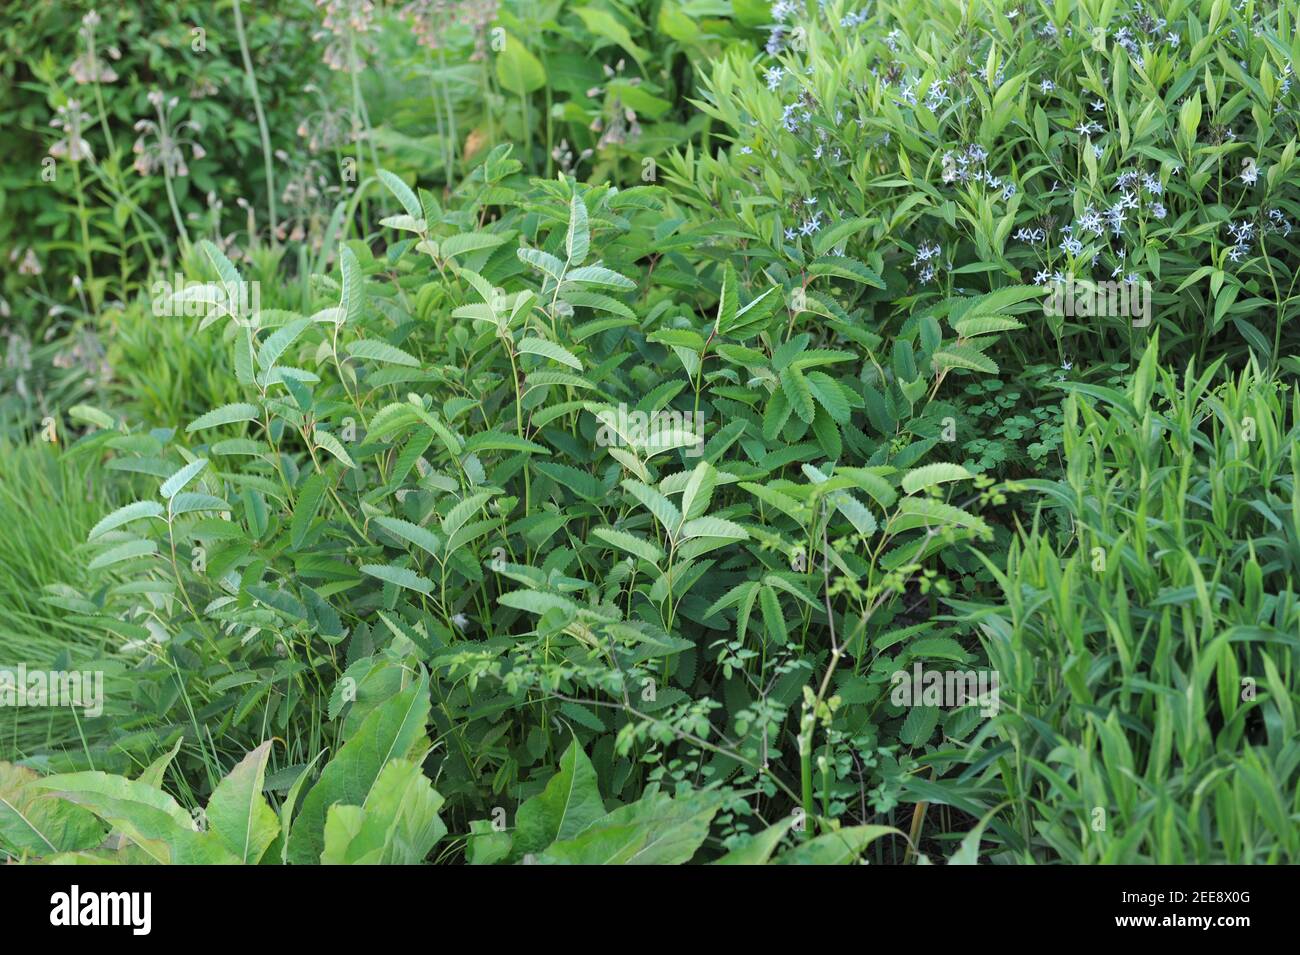 Lush green foliage of white canadian burnet (Sanguisorba canadensis) in a garden in May Stock Photo